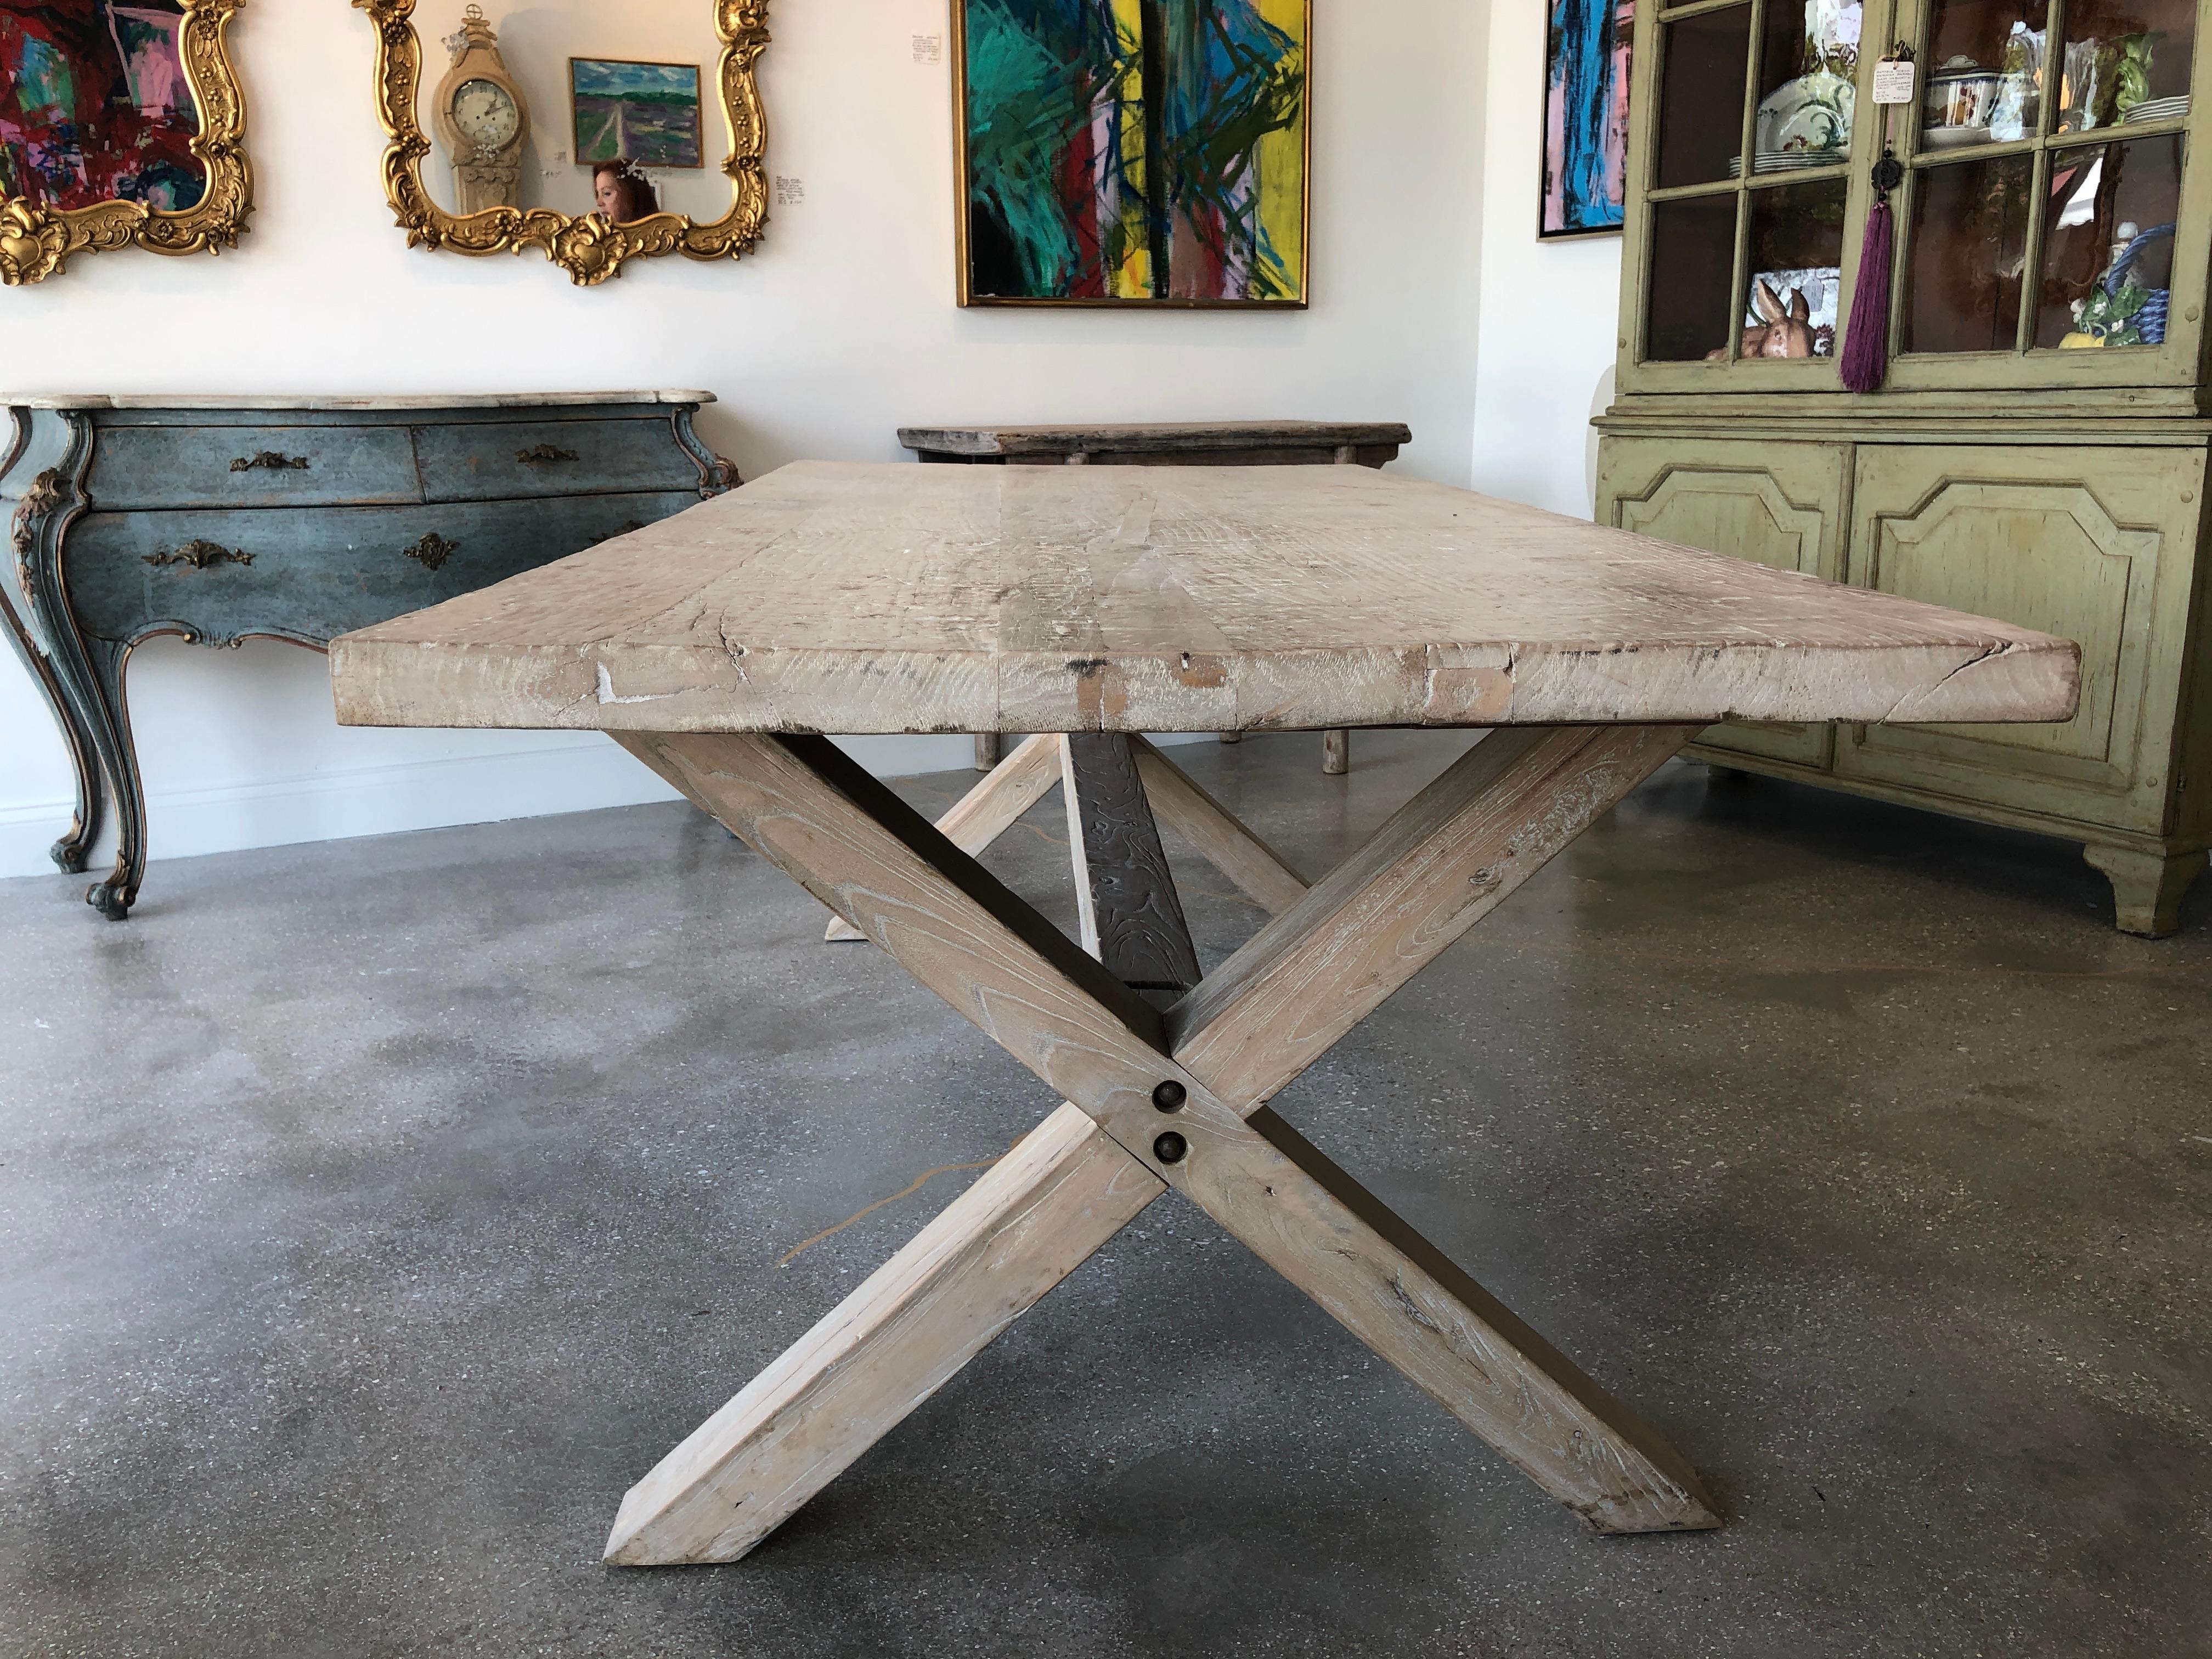 Organic antique Asian farm table in bleached poplar wood 19th century antique Asian door panel on top, X-shape base was made in 20th century with large center stretcher. Top has a wonderful roughhewn rustic patina.

Measures: H 29.25